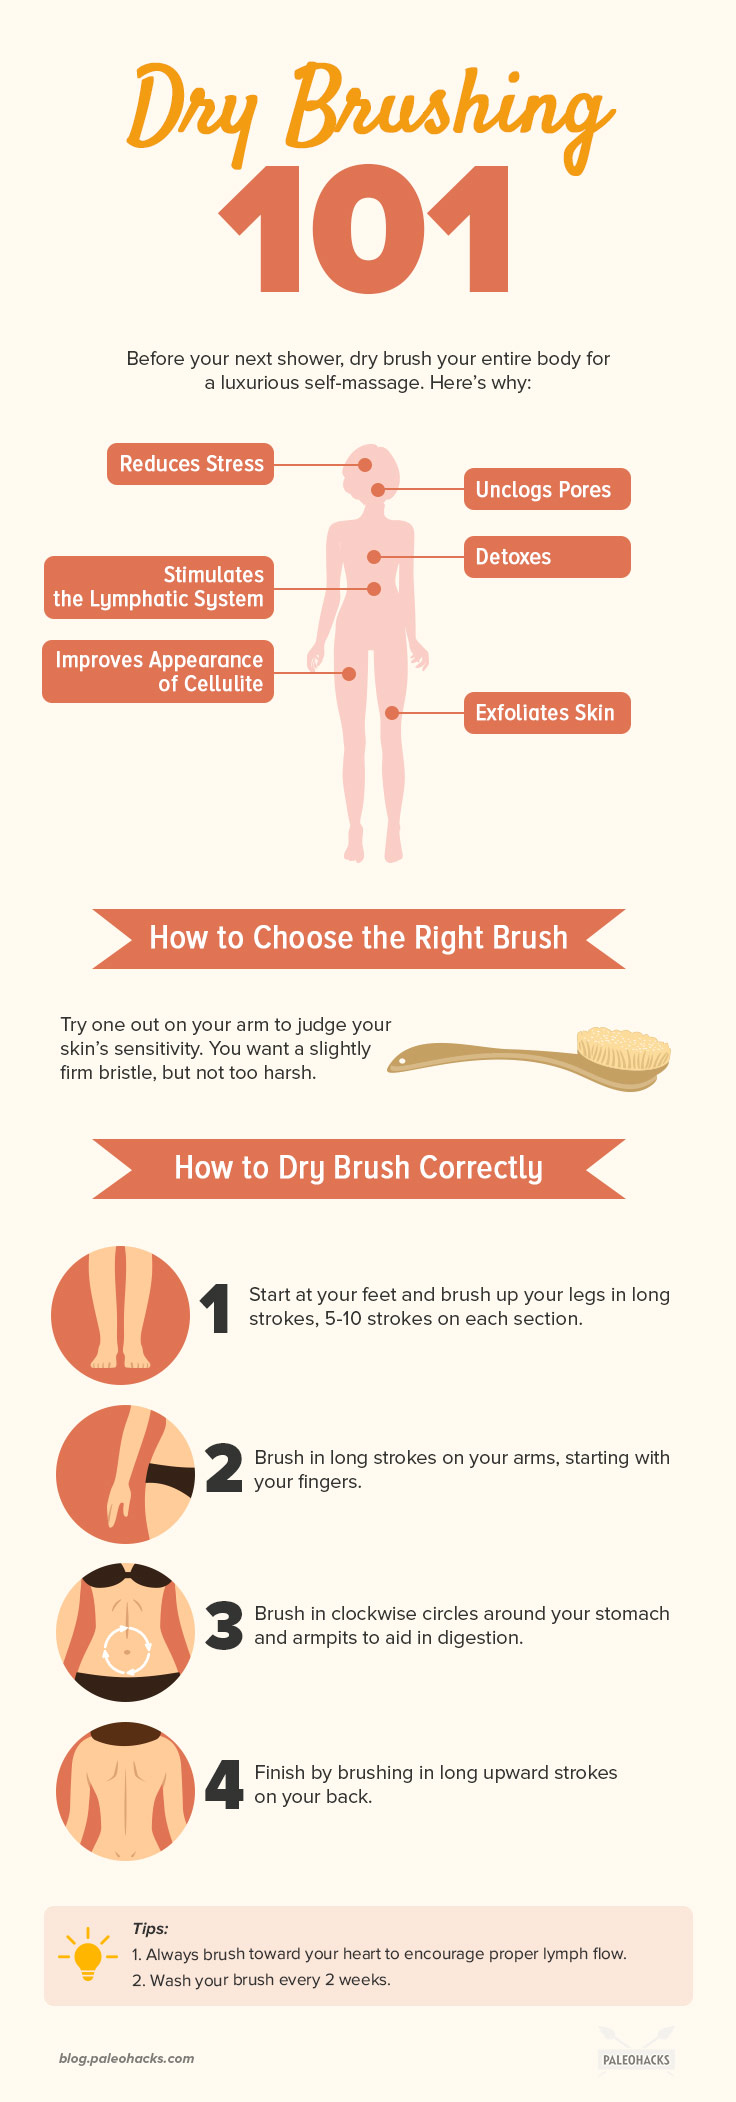 Before your next shower, dry brush your entire body for an exfoliating self-massage that detoxifies from head to toe.